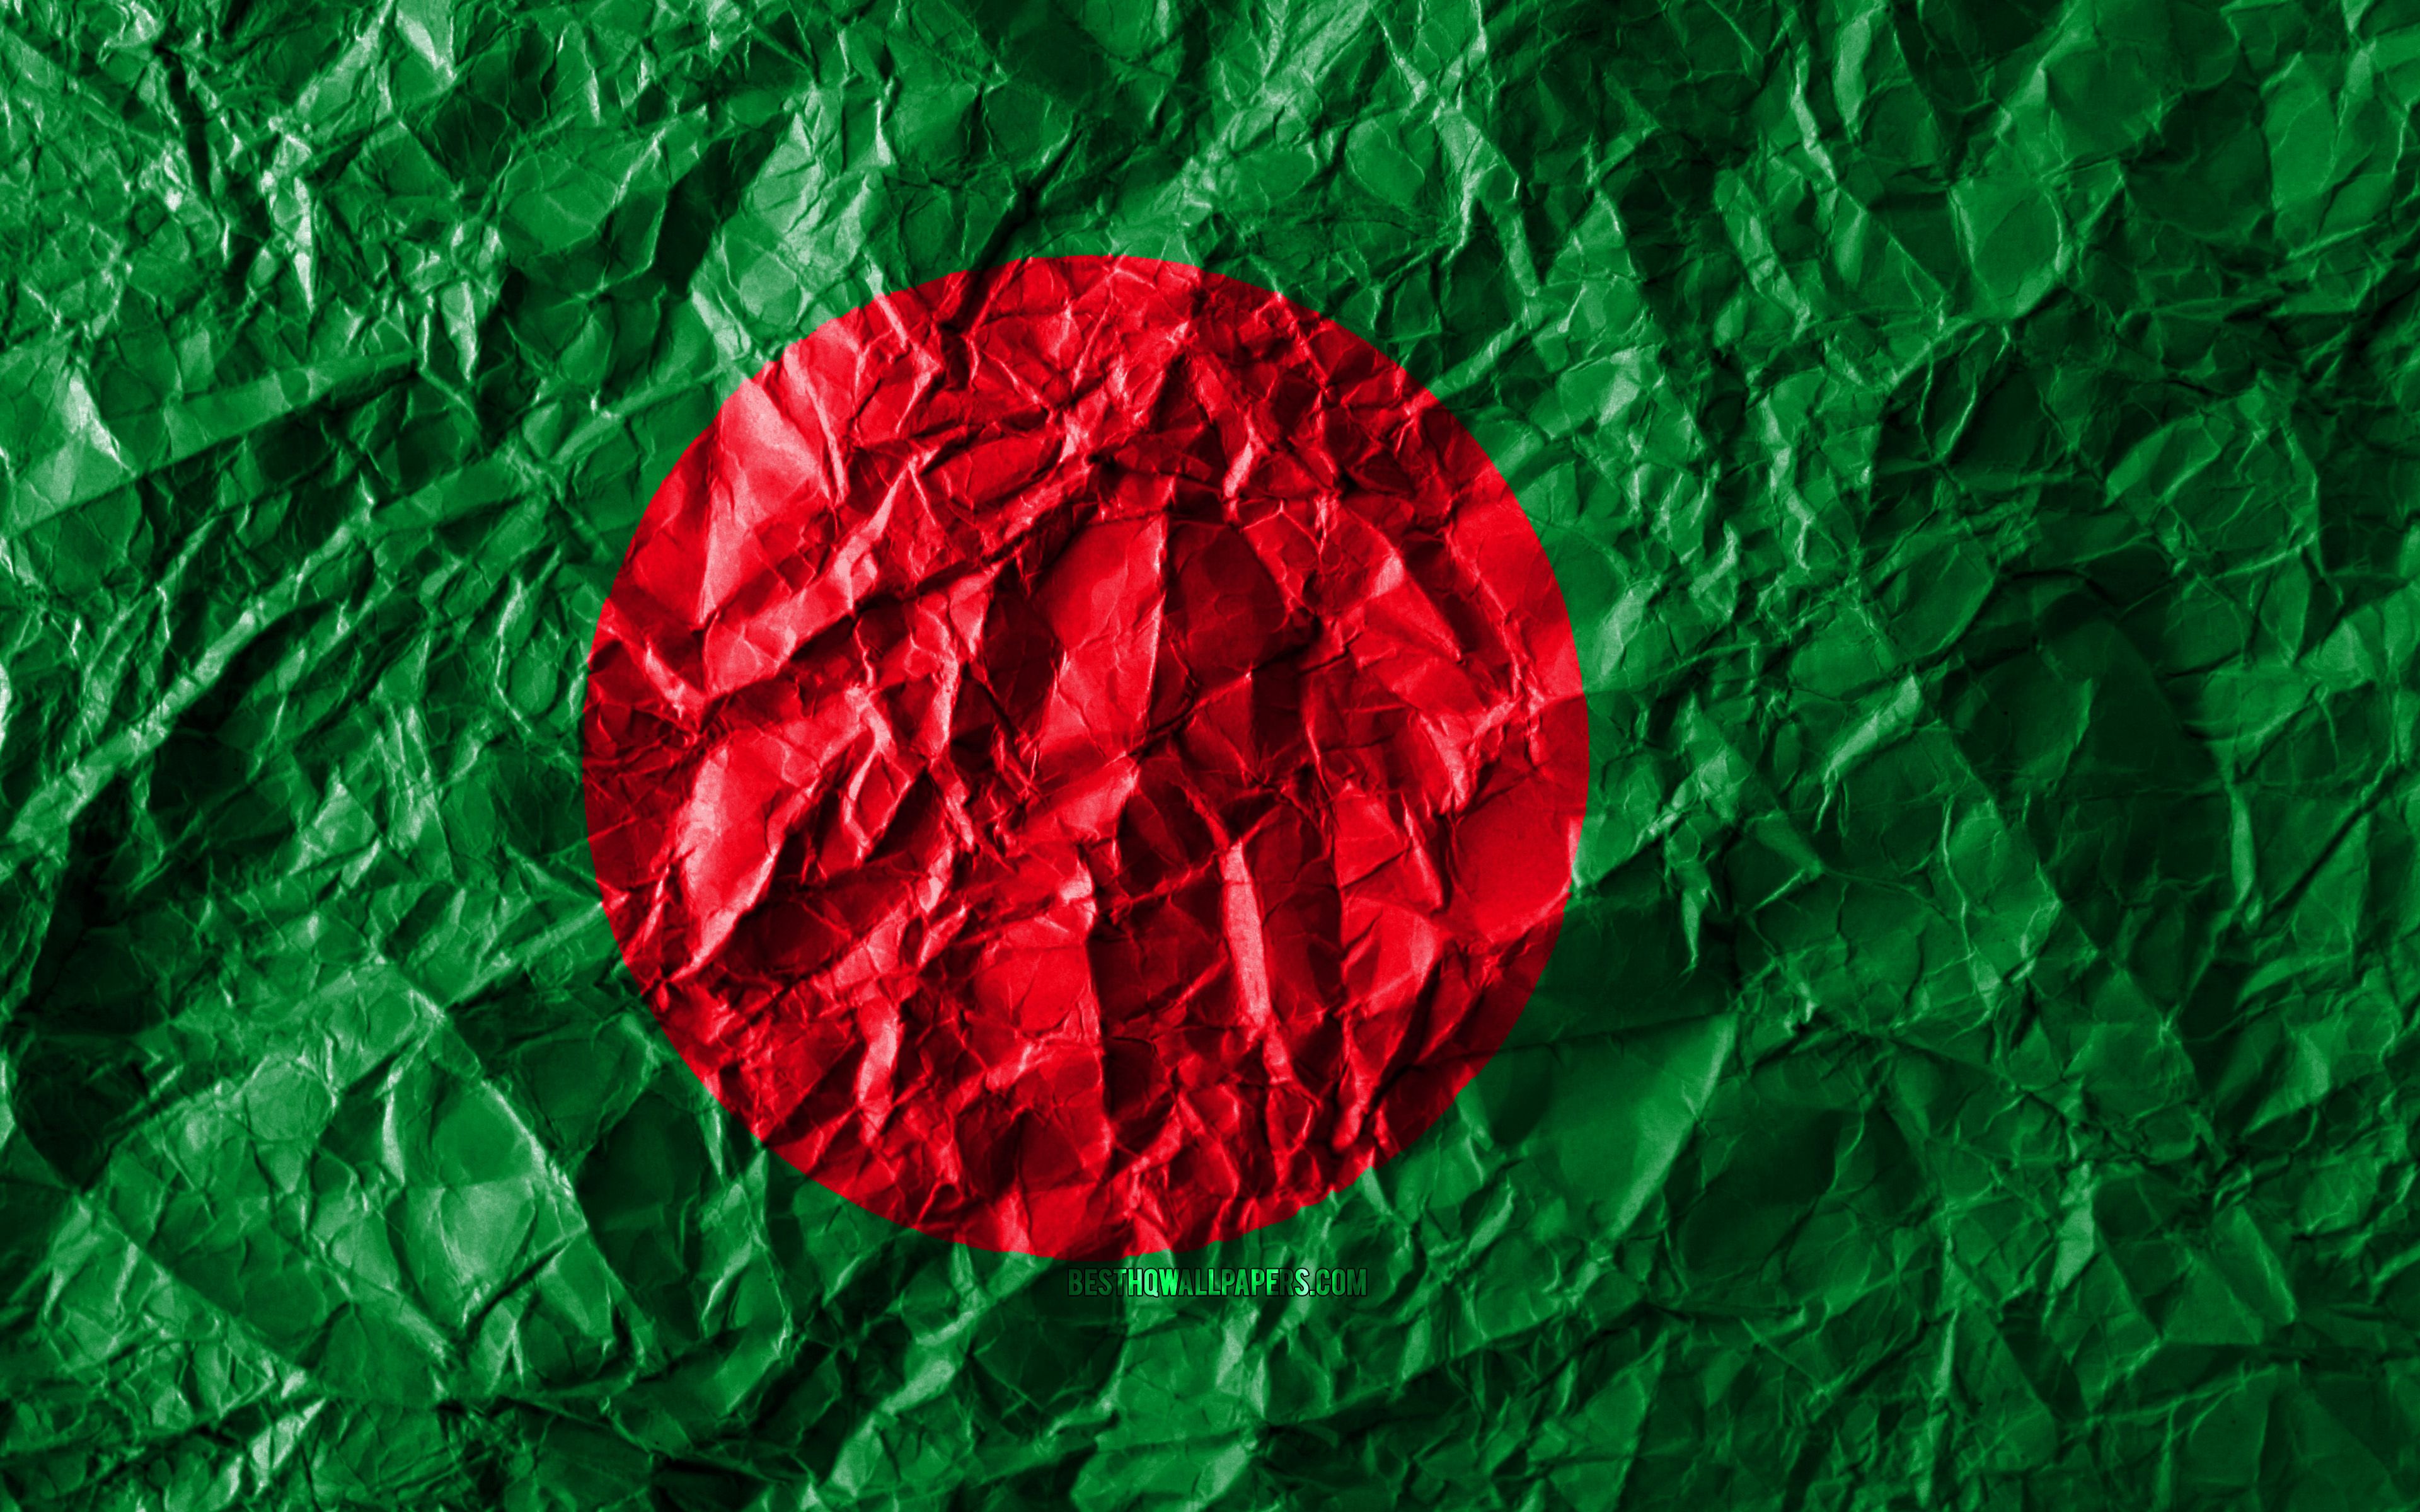 Download wallpaper Bangladesh flag, 4k, crumpled paper, Asian countries, creative, Flag of Bangladesh, national symbols, Asia, Bangladesh 3D flag, Bangladesh for desktop with resolution 3840x2400. High Quality HD picture wallpaper